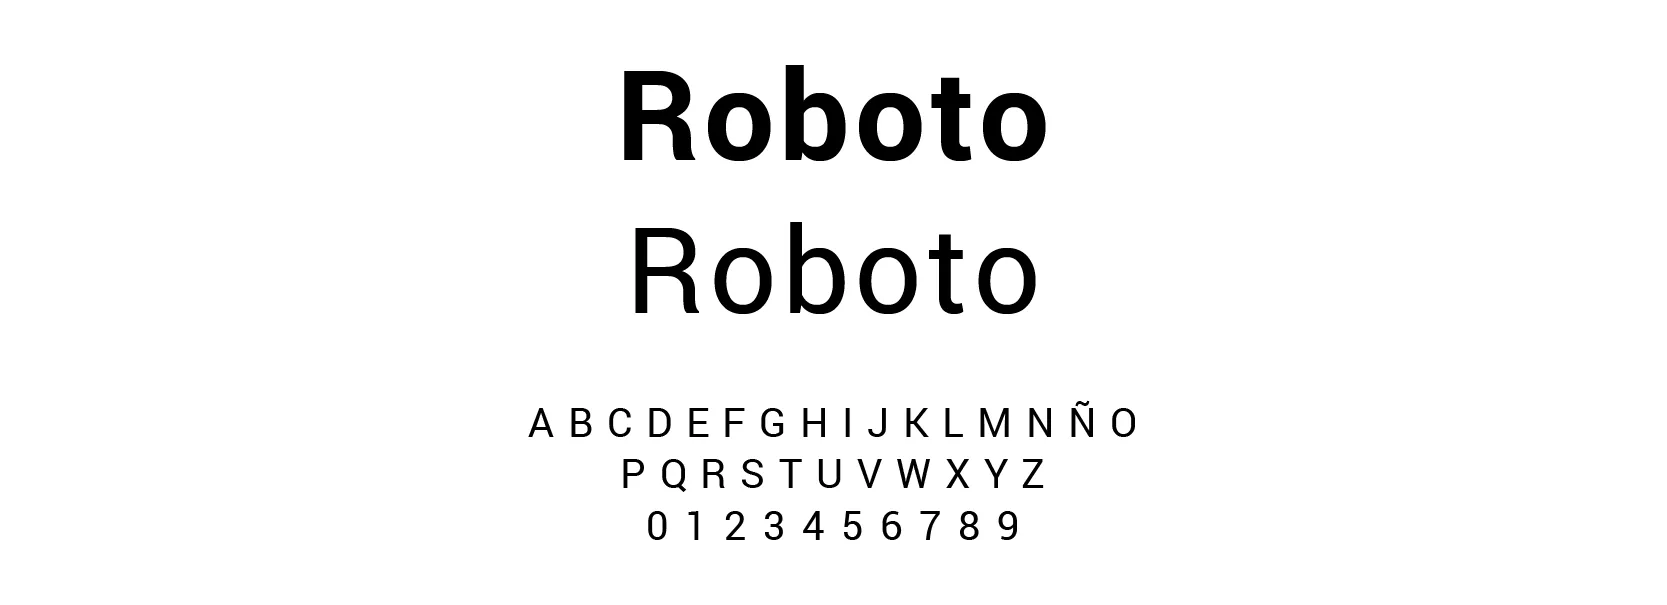 Best font for Shopify store: Roboto